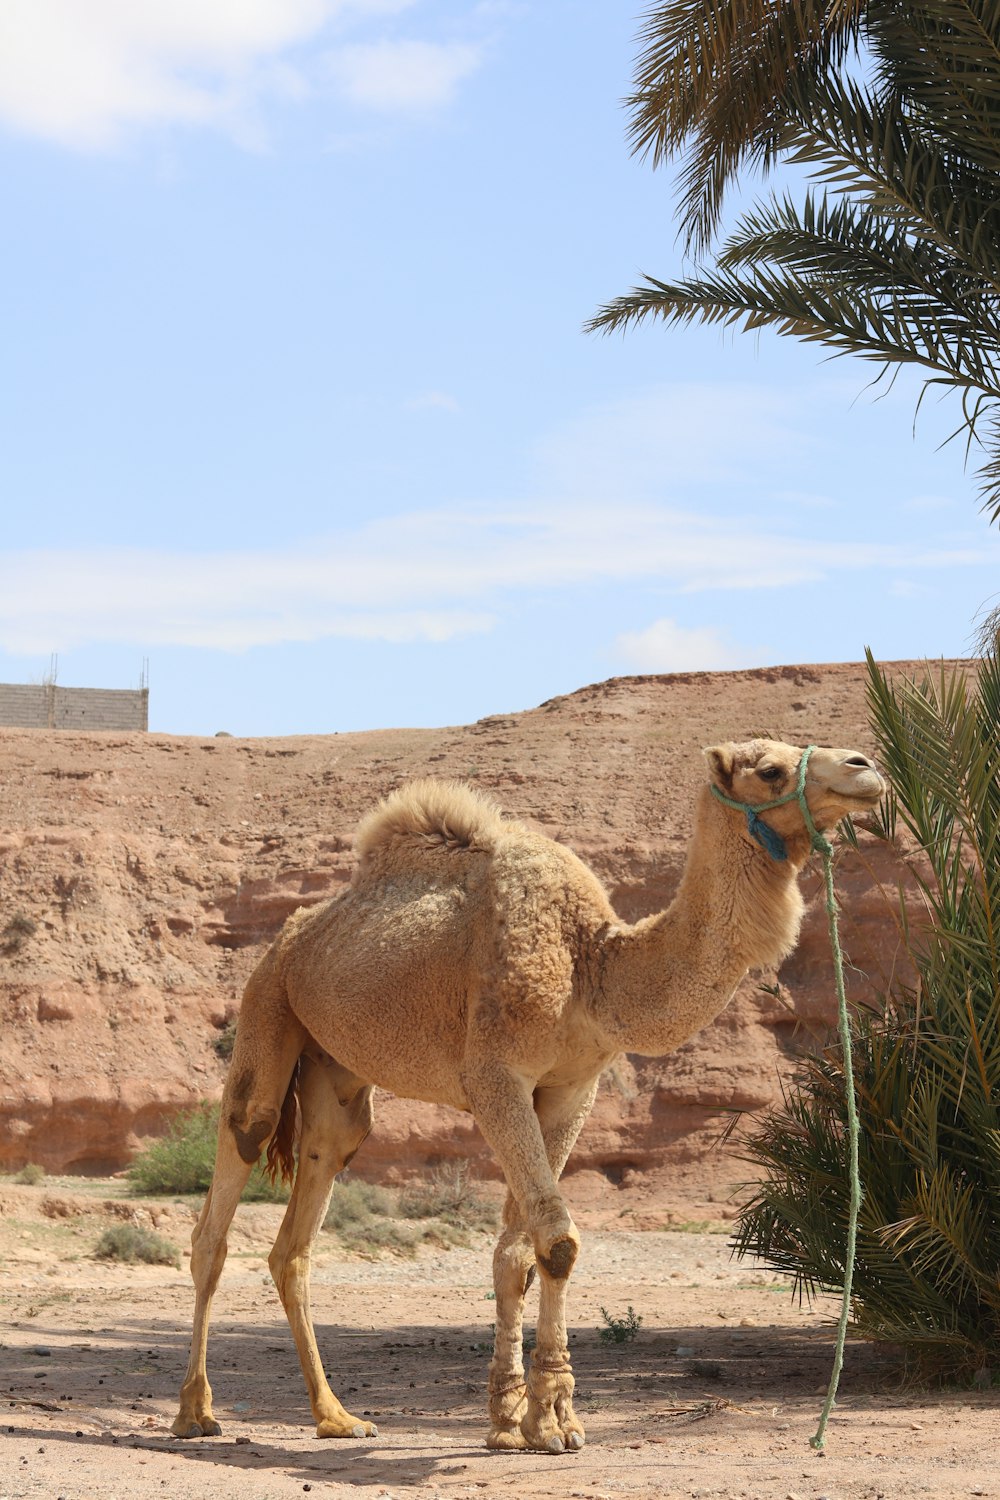 a camel standing in the desert with a palm tree